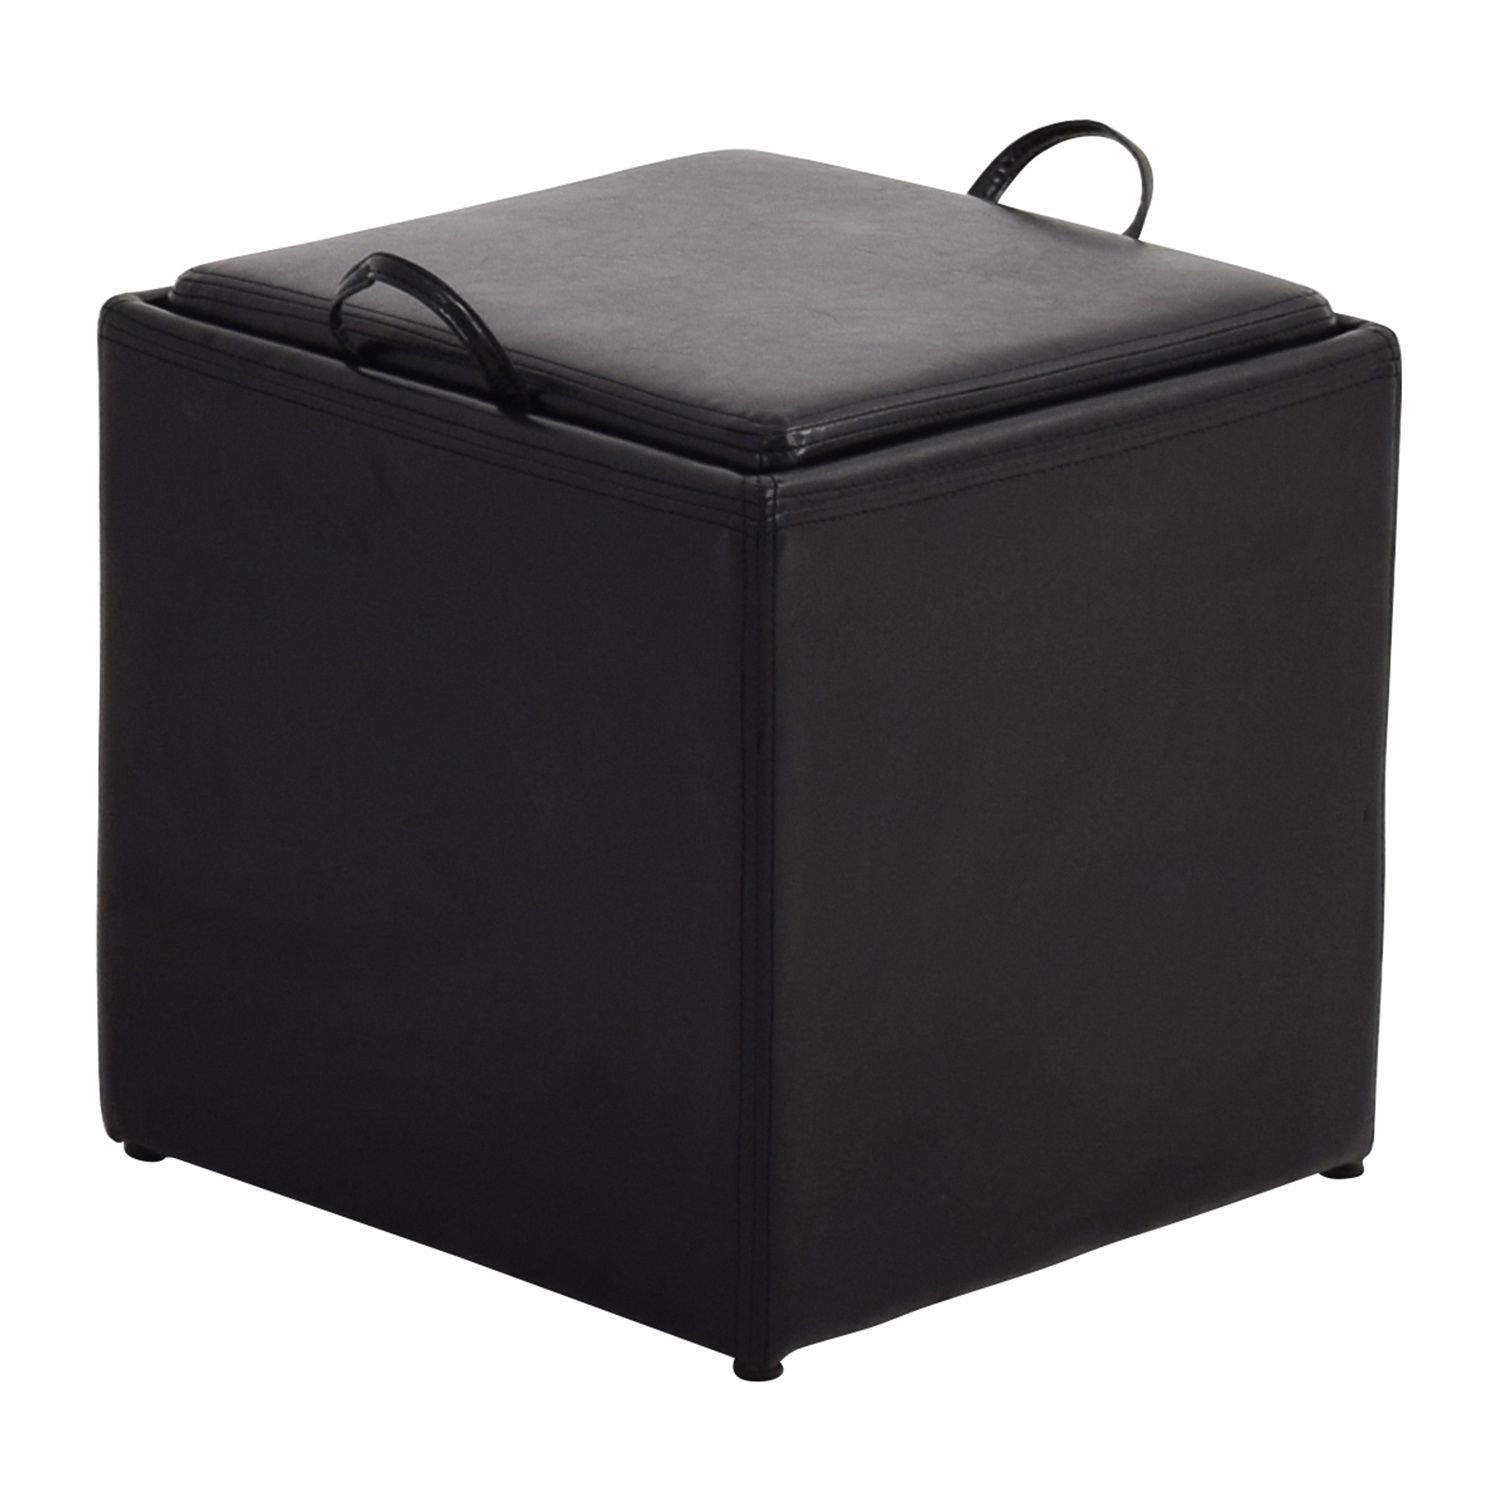 70% Off – Black Leather Storage Ottoman With Smaller Ottoman / Chairs Intended For Black Leather Ottomans (View 5 of 20)